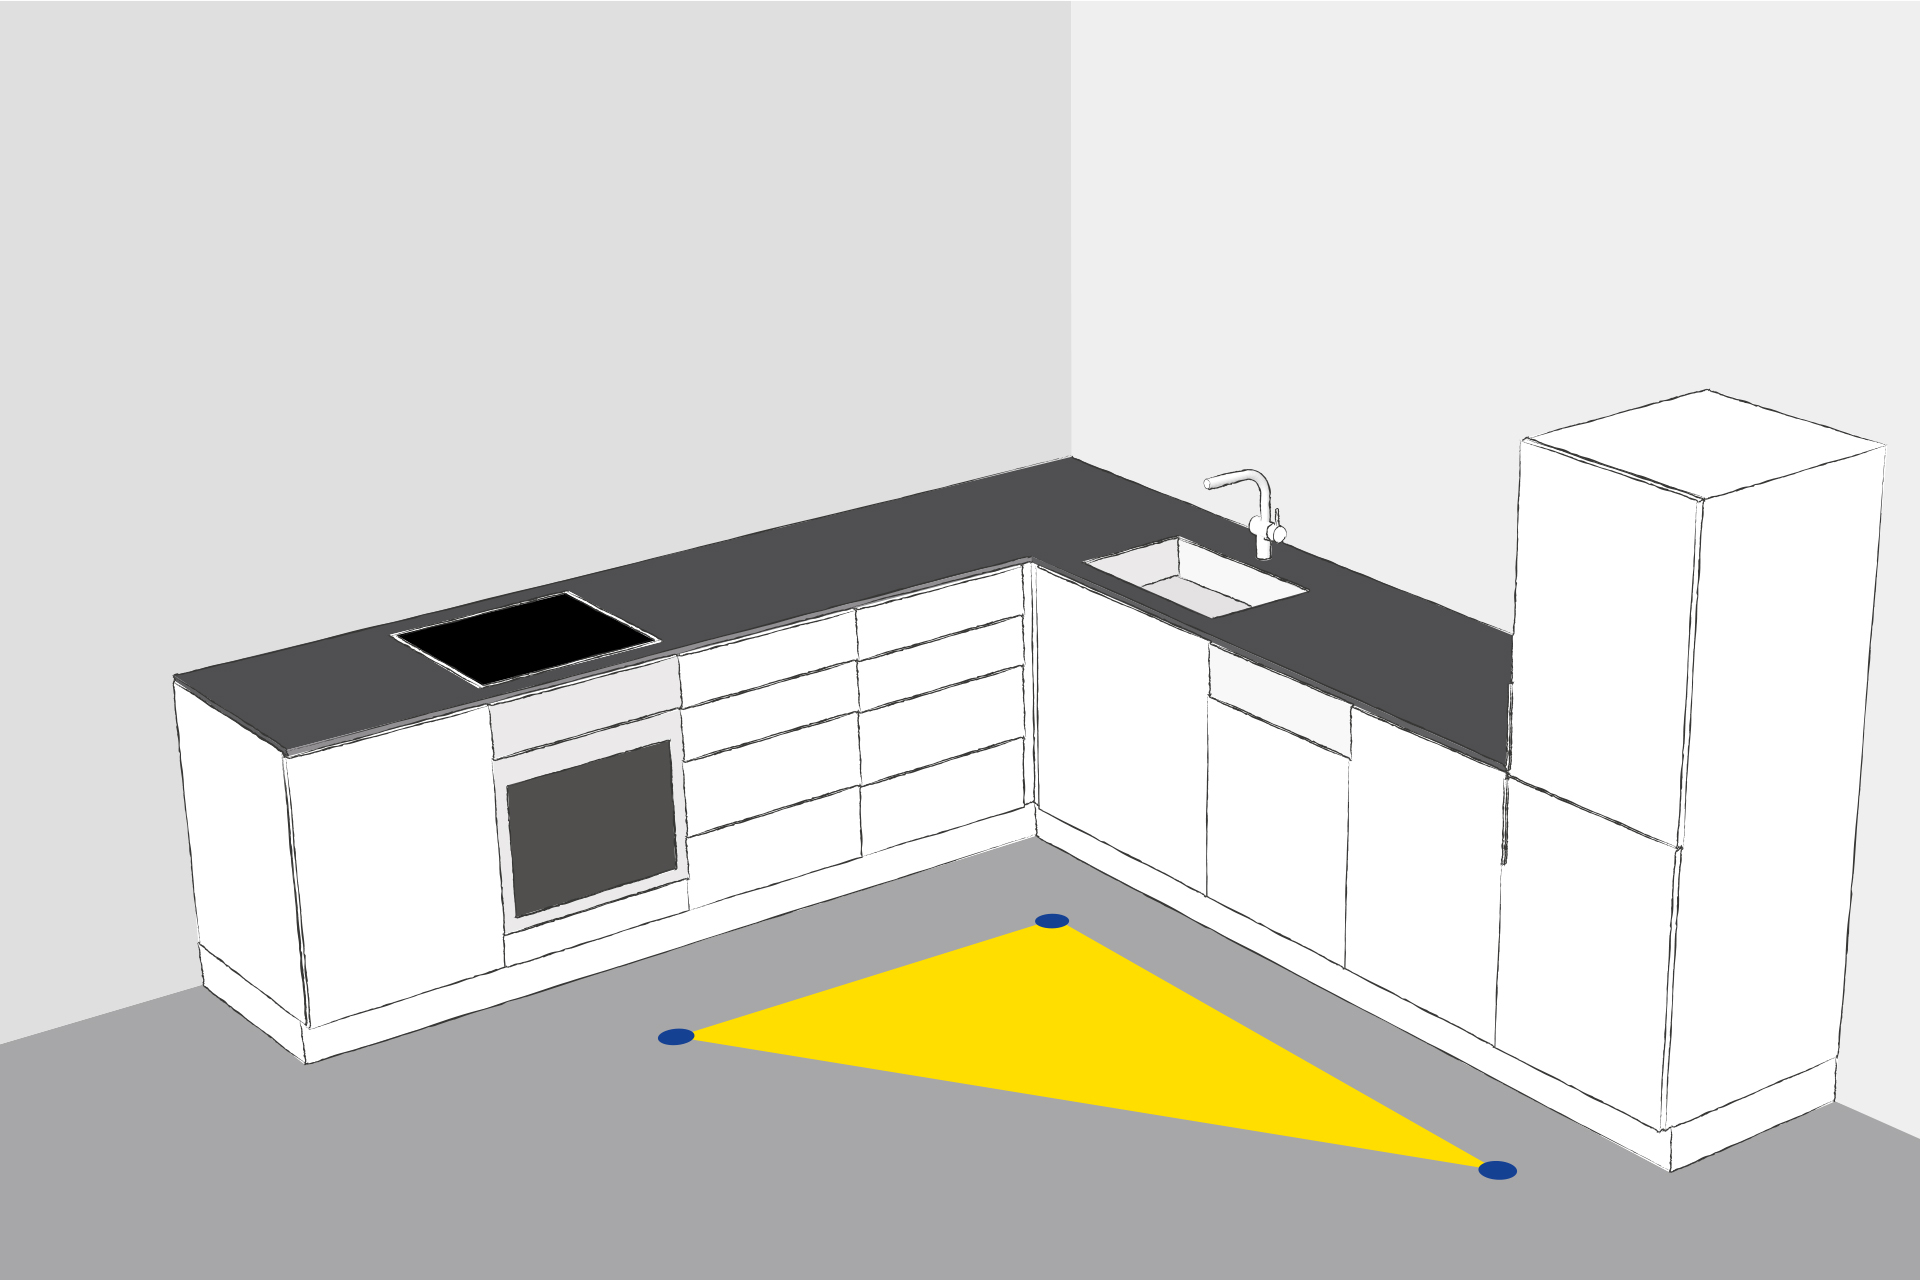 In an L-shaped kitchen, the routes are divided between the cooking and serving areas.